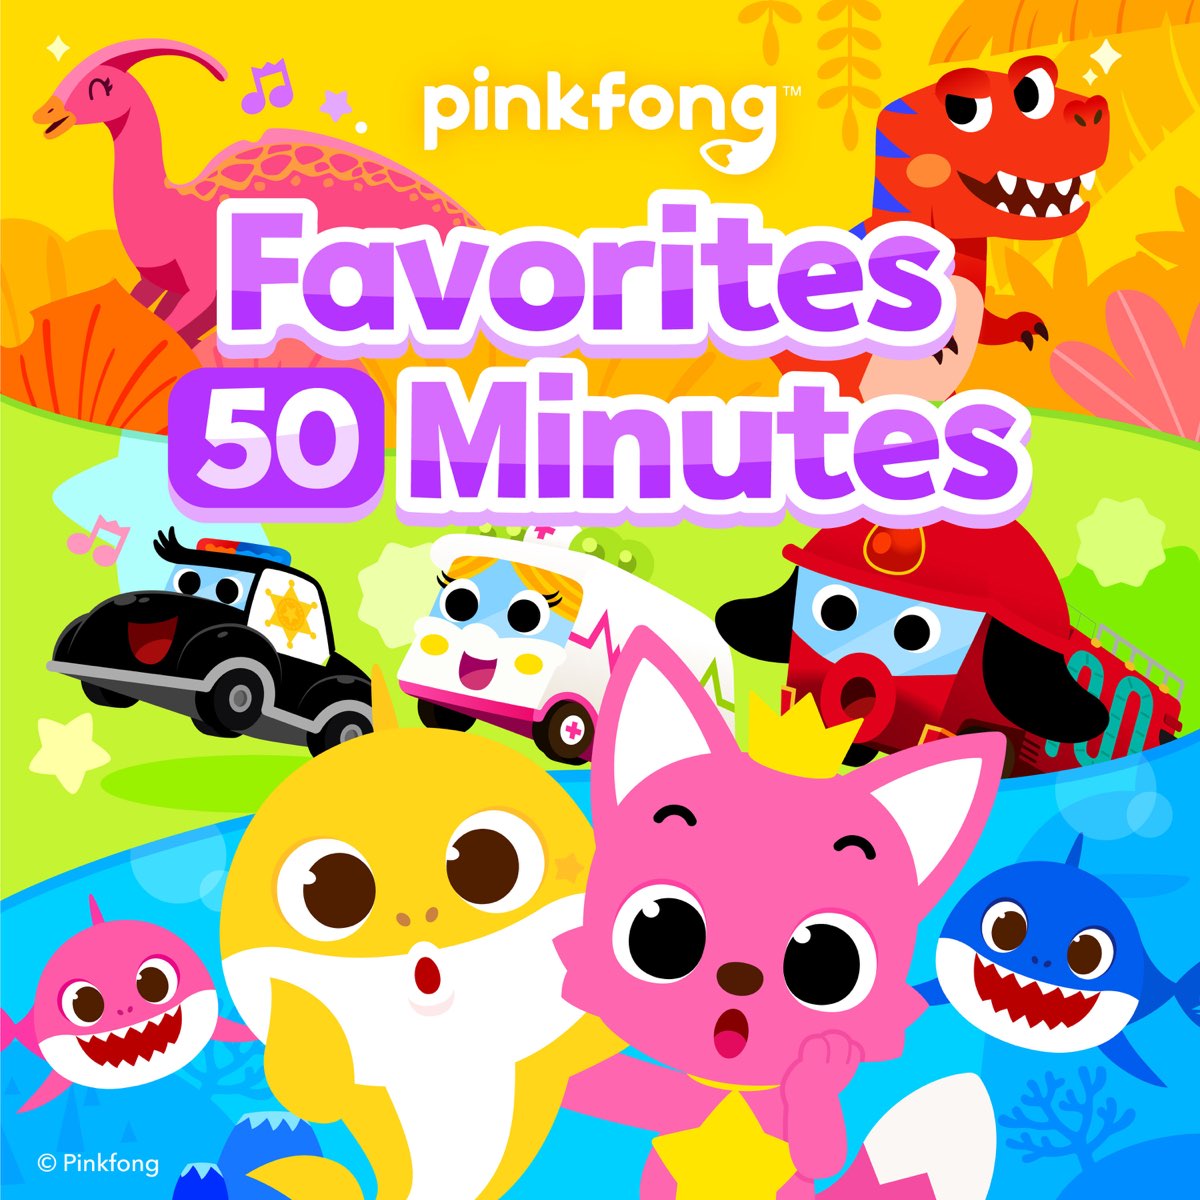 ‎Pinkfong Favorites 50 Minutes - Album by Pinkfong - Apple Music